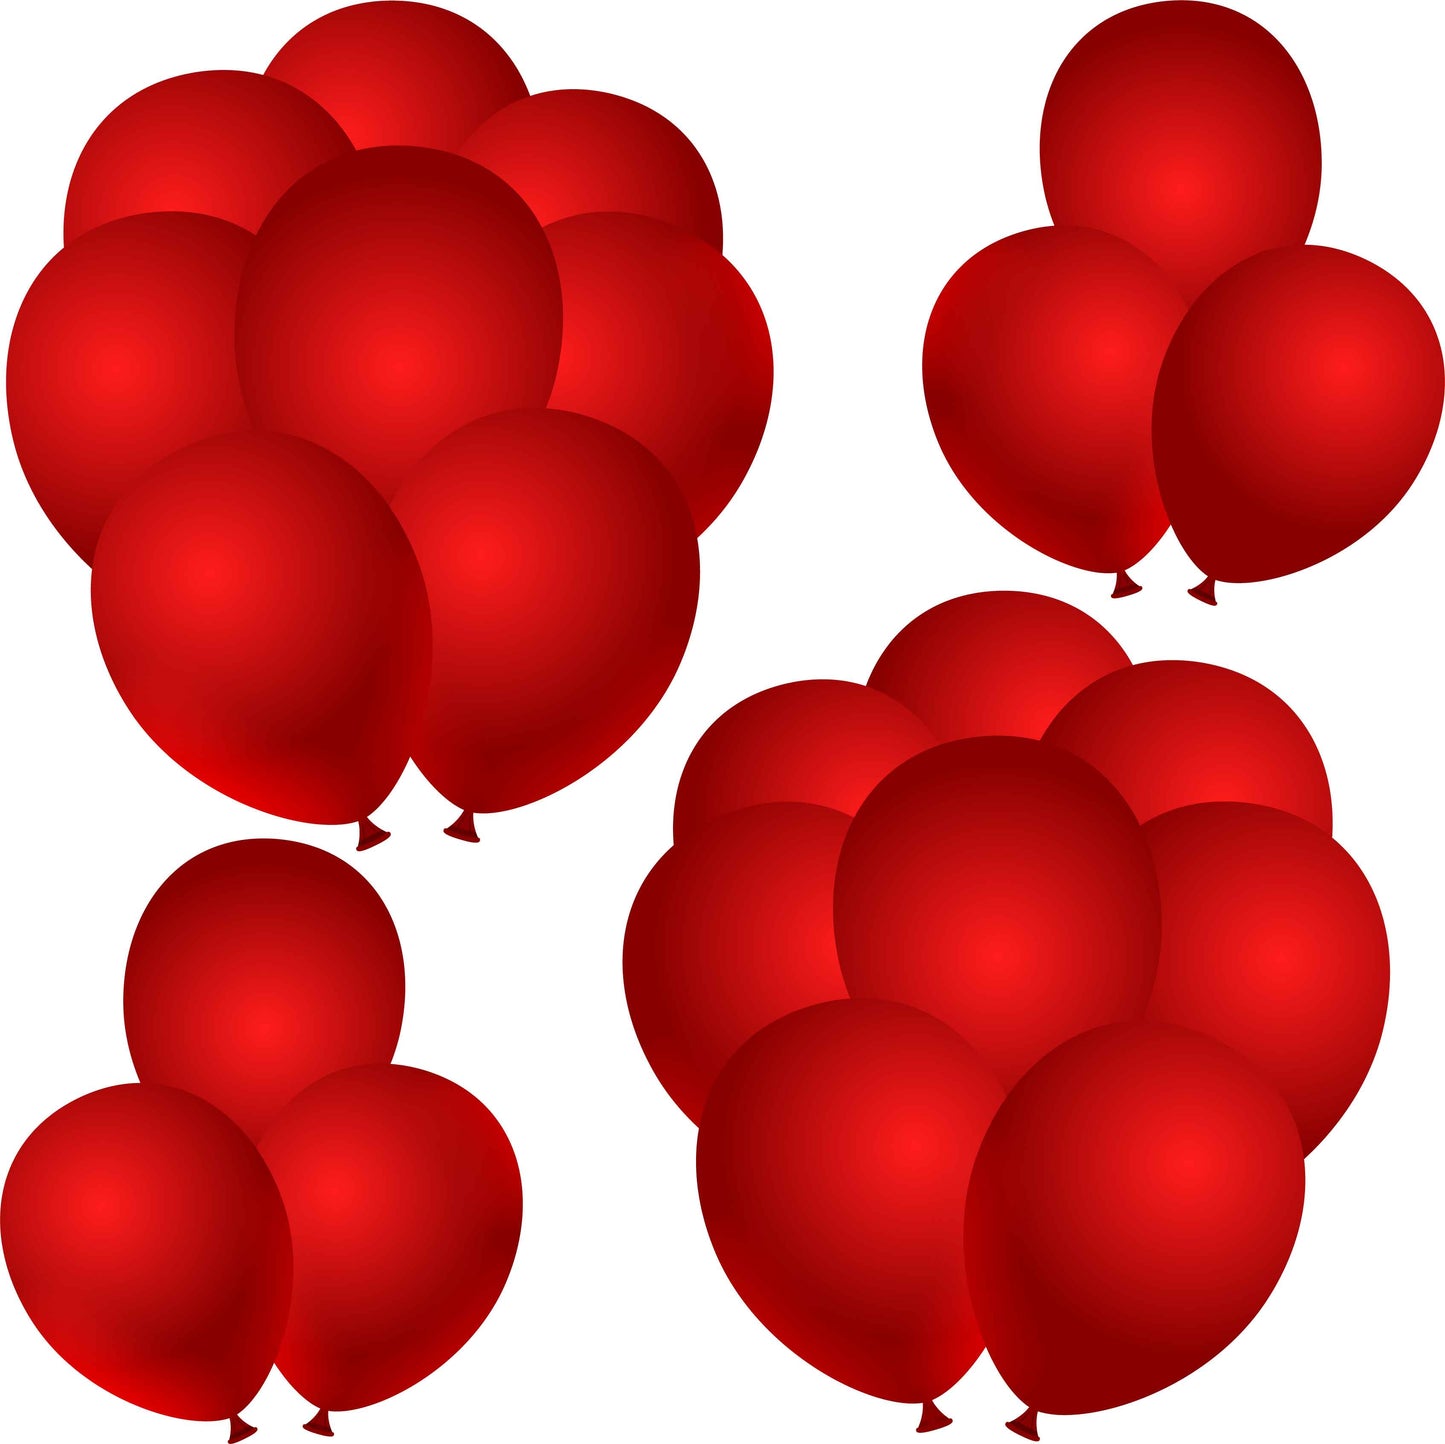 Solid Red Balloons Half Sheet Misc.